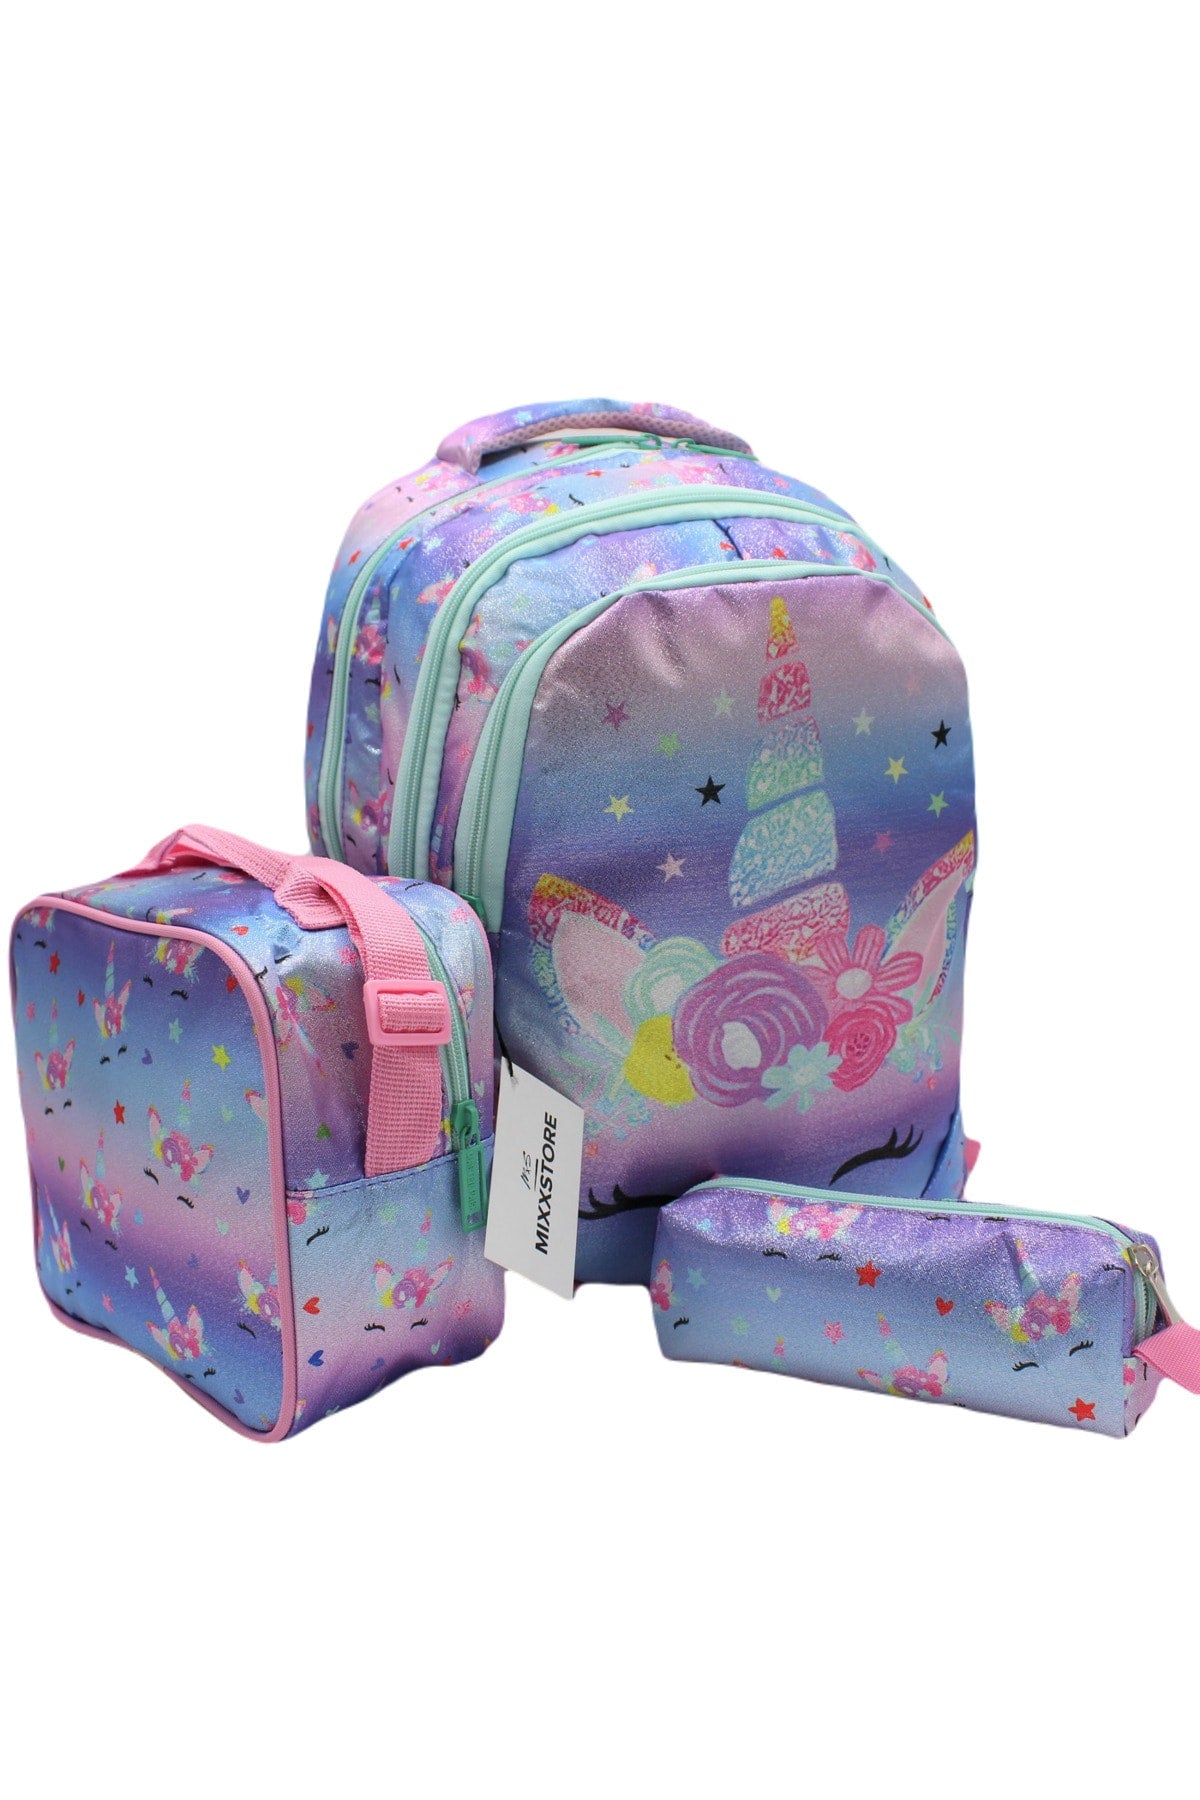 Master Pack Sim Unicorn Patterned Purple Color Baby Girl Backpack Primary School Bag With Food And Pencil Holder